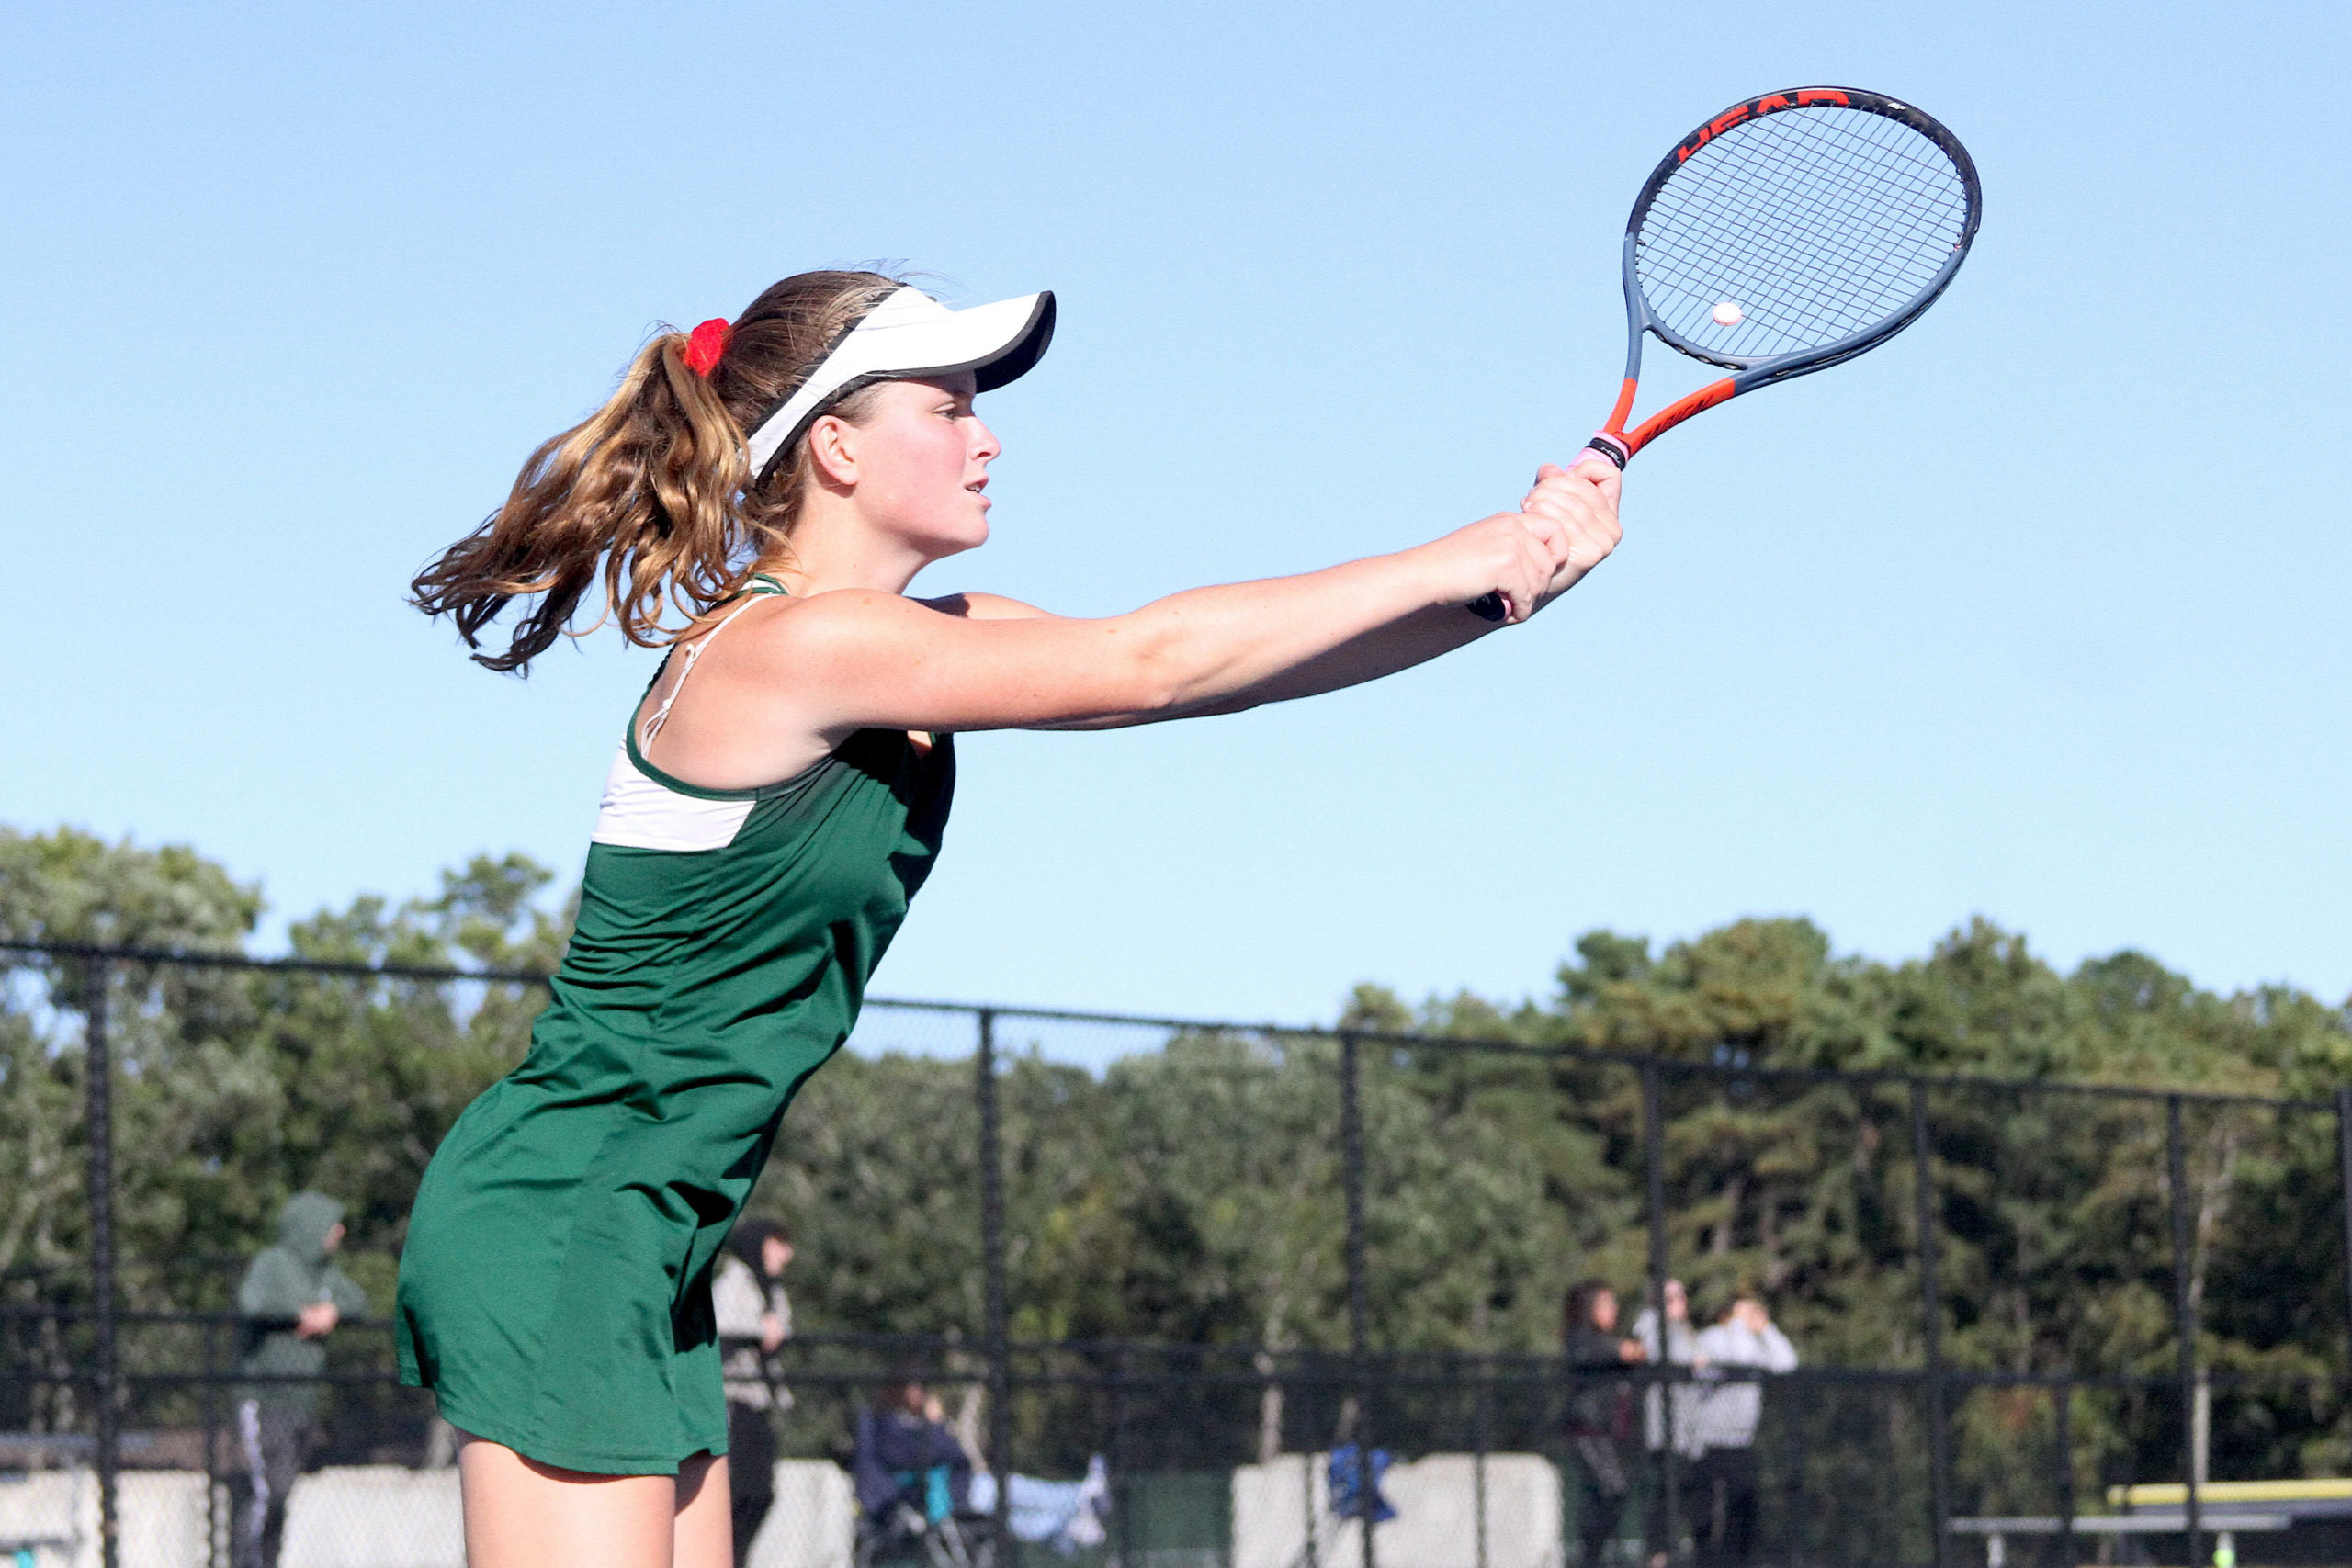 Westhampton Beach senior Katelyn Stabile reaches for the ball at the net for the final point in the Division IV doubles final win over William Floyd. DESIRÉE KEEGAN